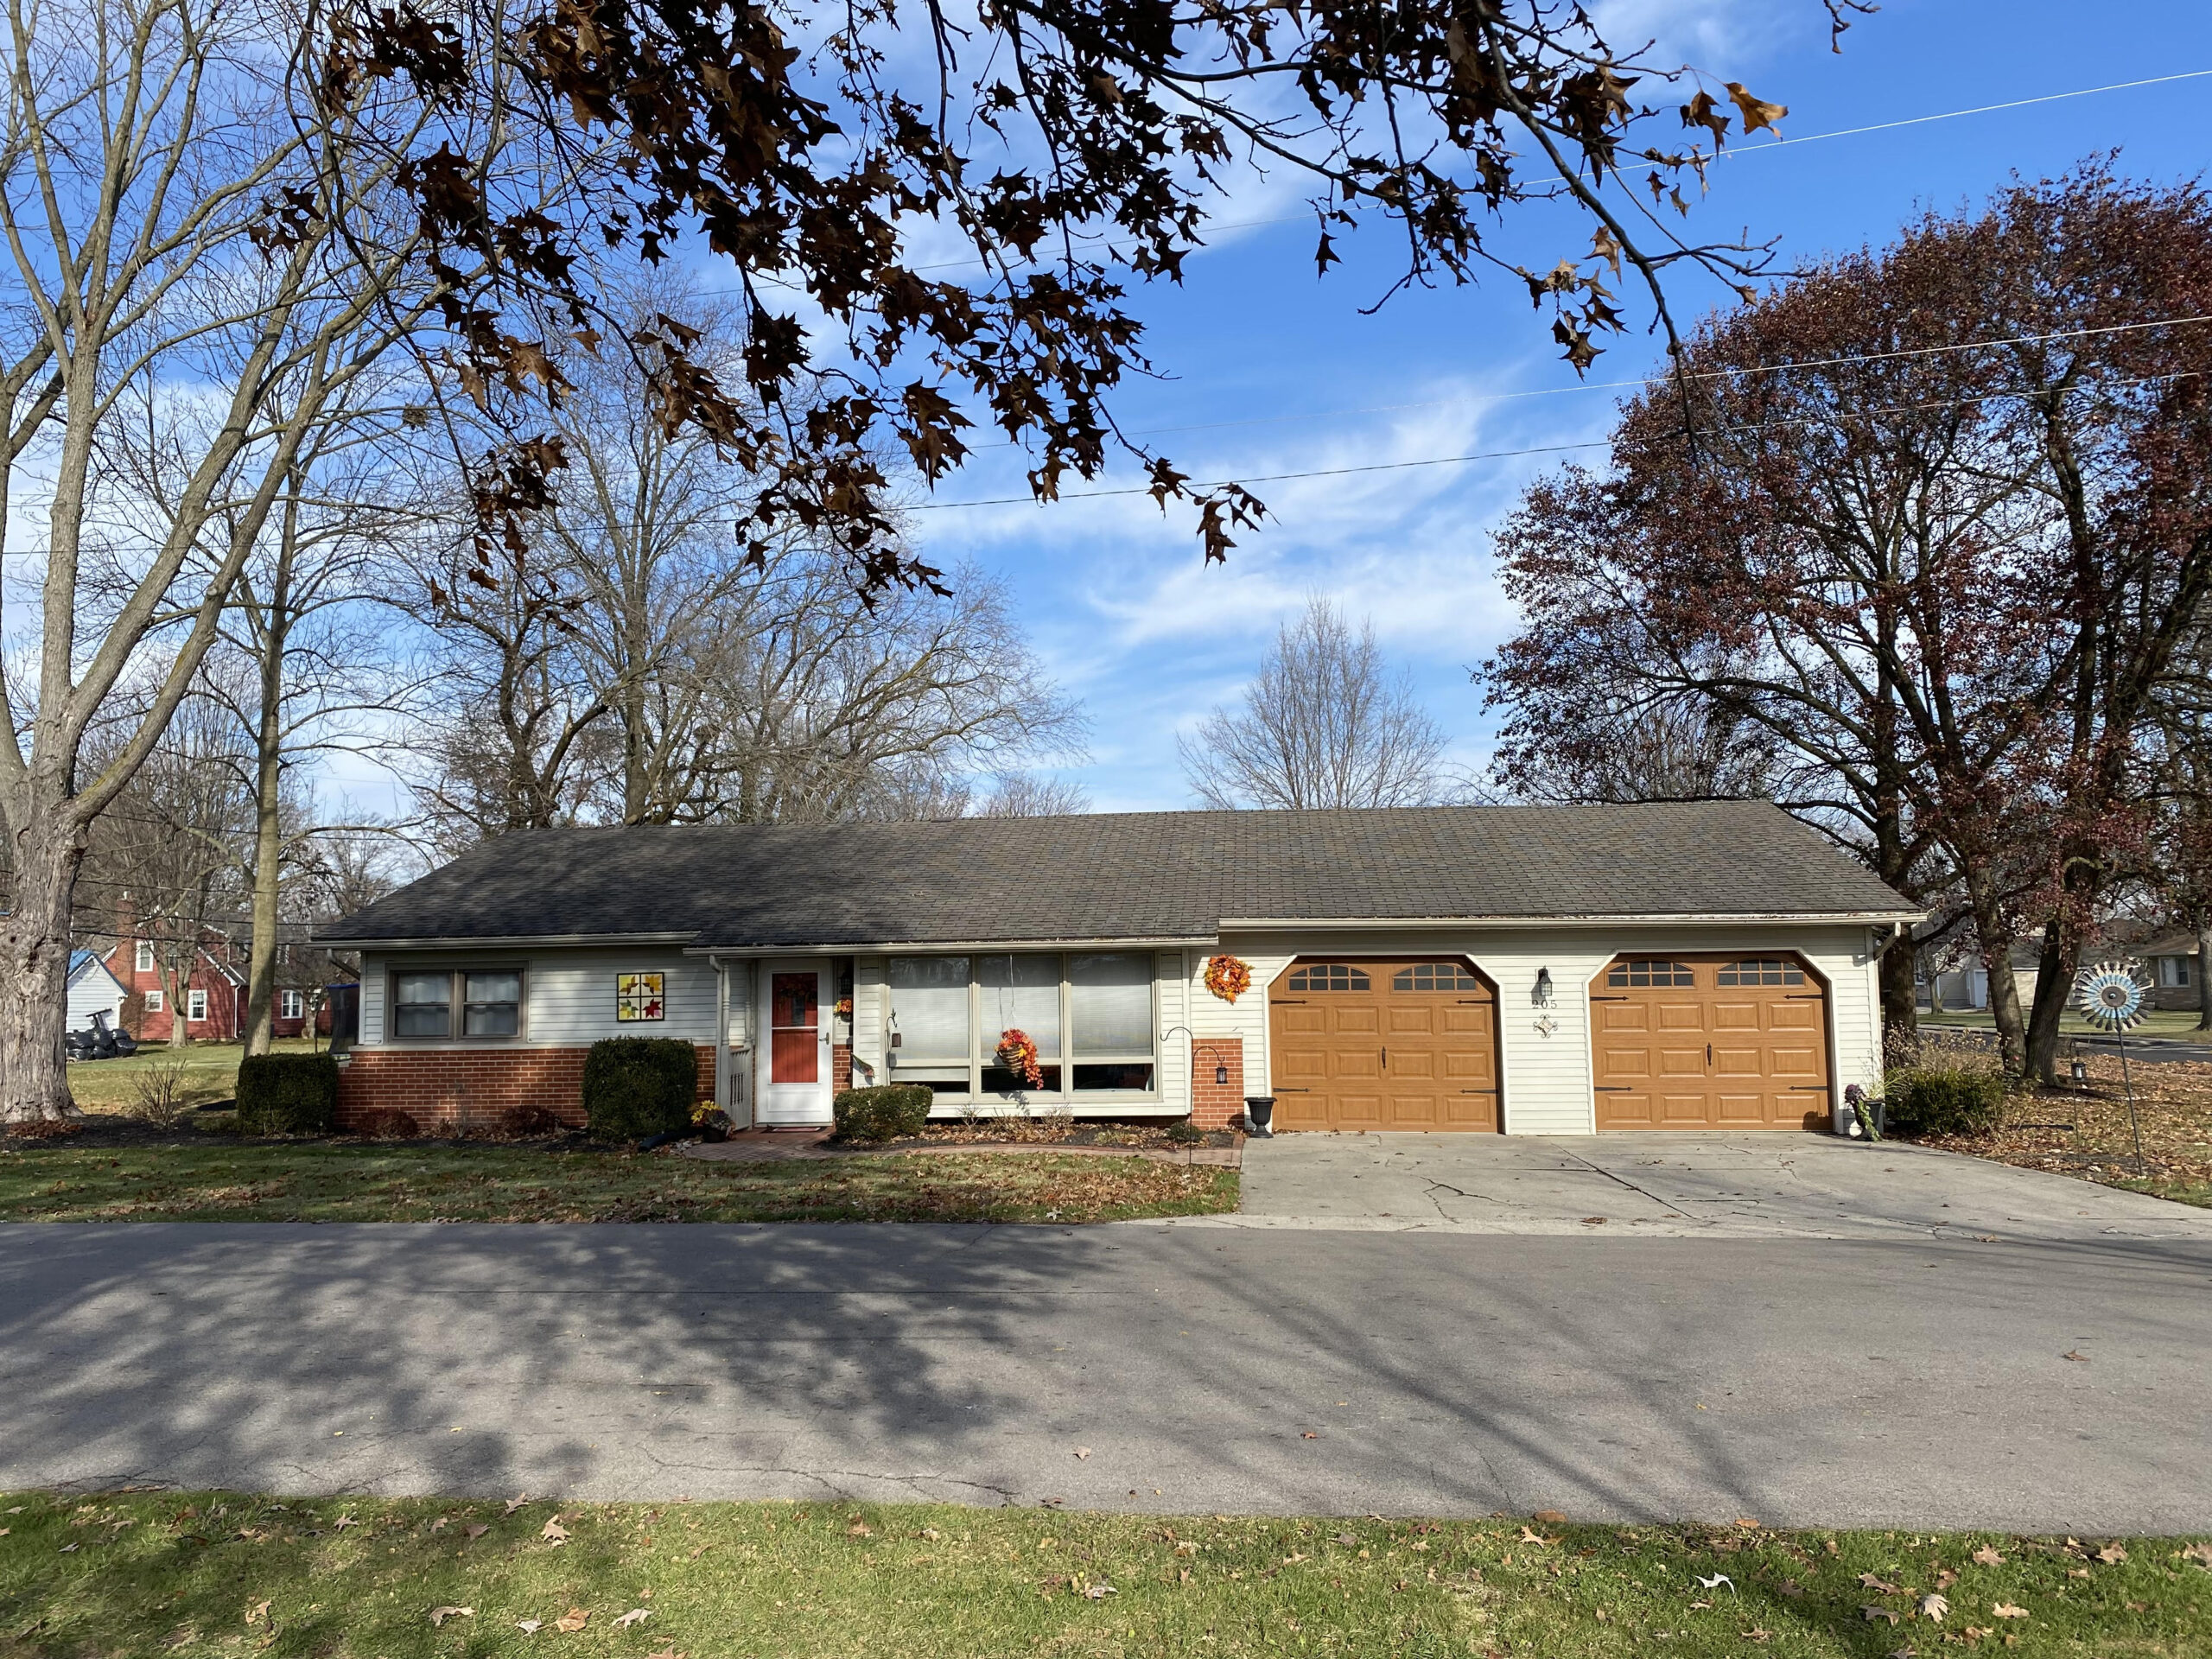 205 Park Ave. Berne IN 46711 – Ranch Home – Close to park – $140,000